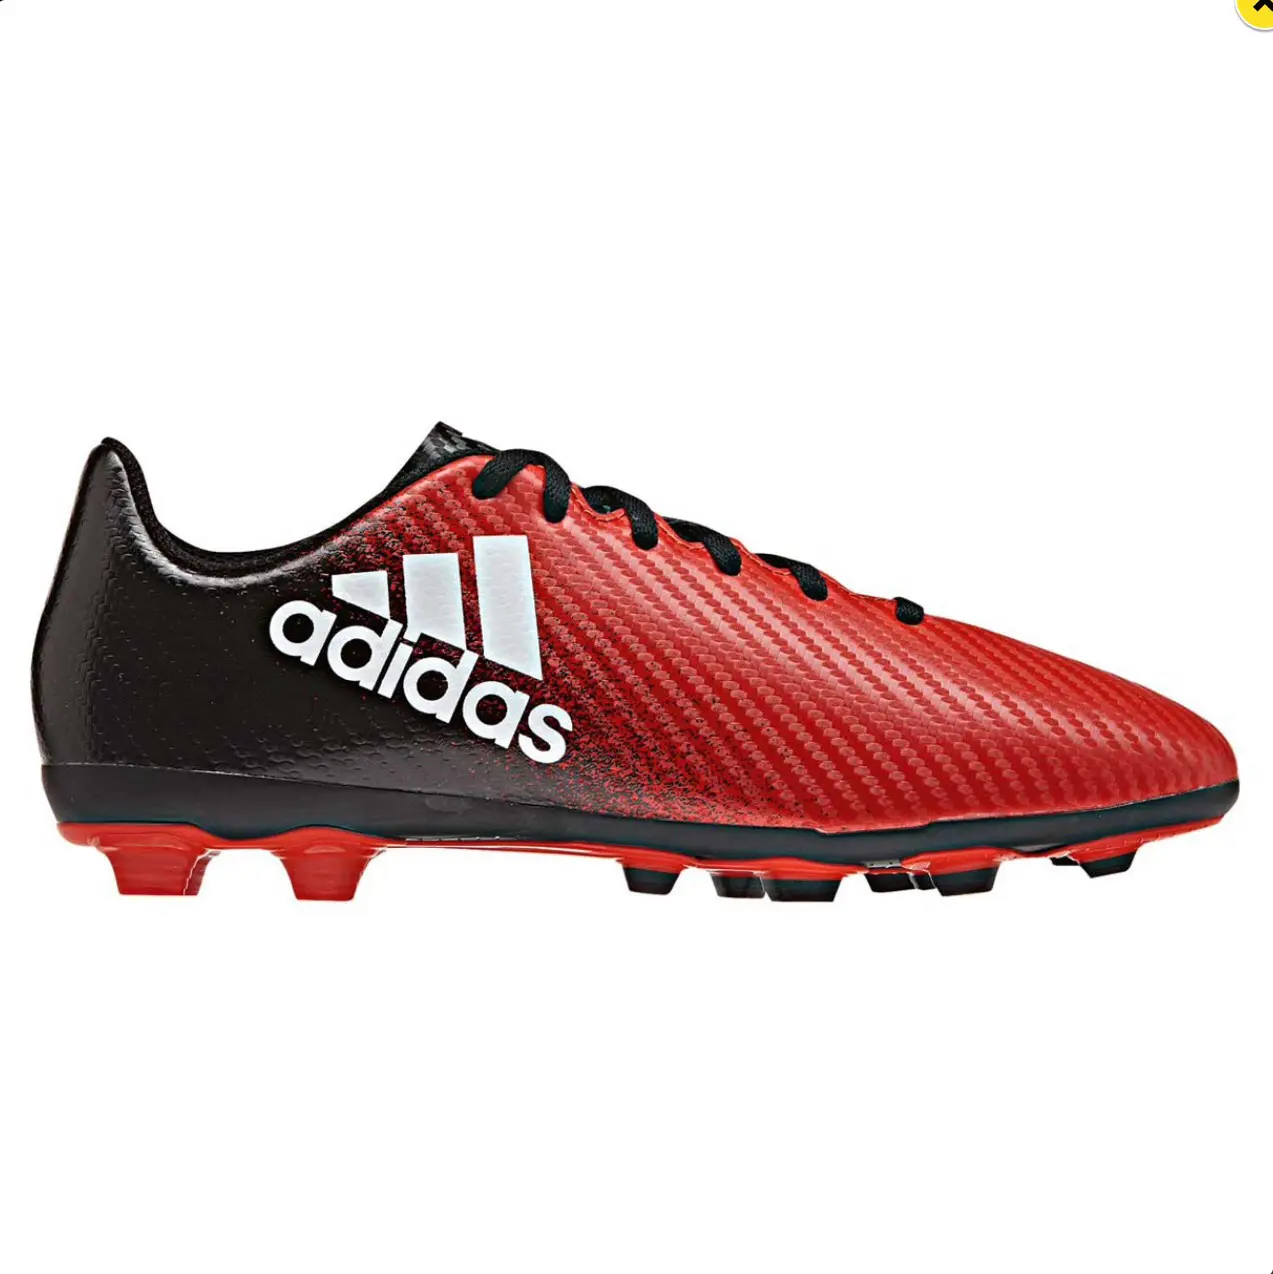 Adidas X 16.4 Junior (Red/Black/White) - The Football Factory